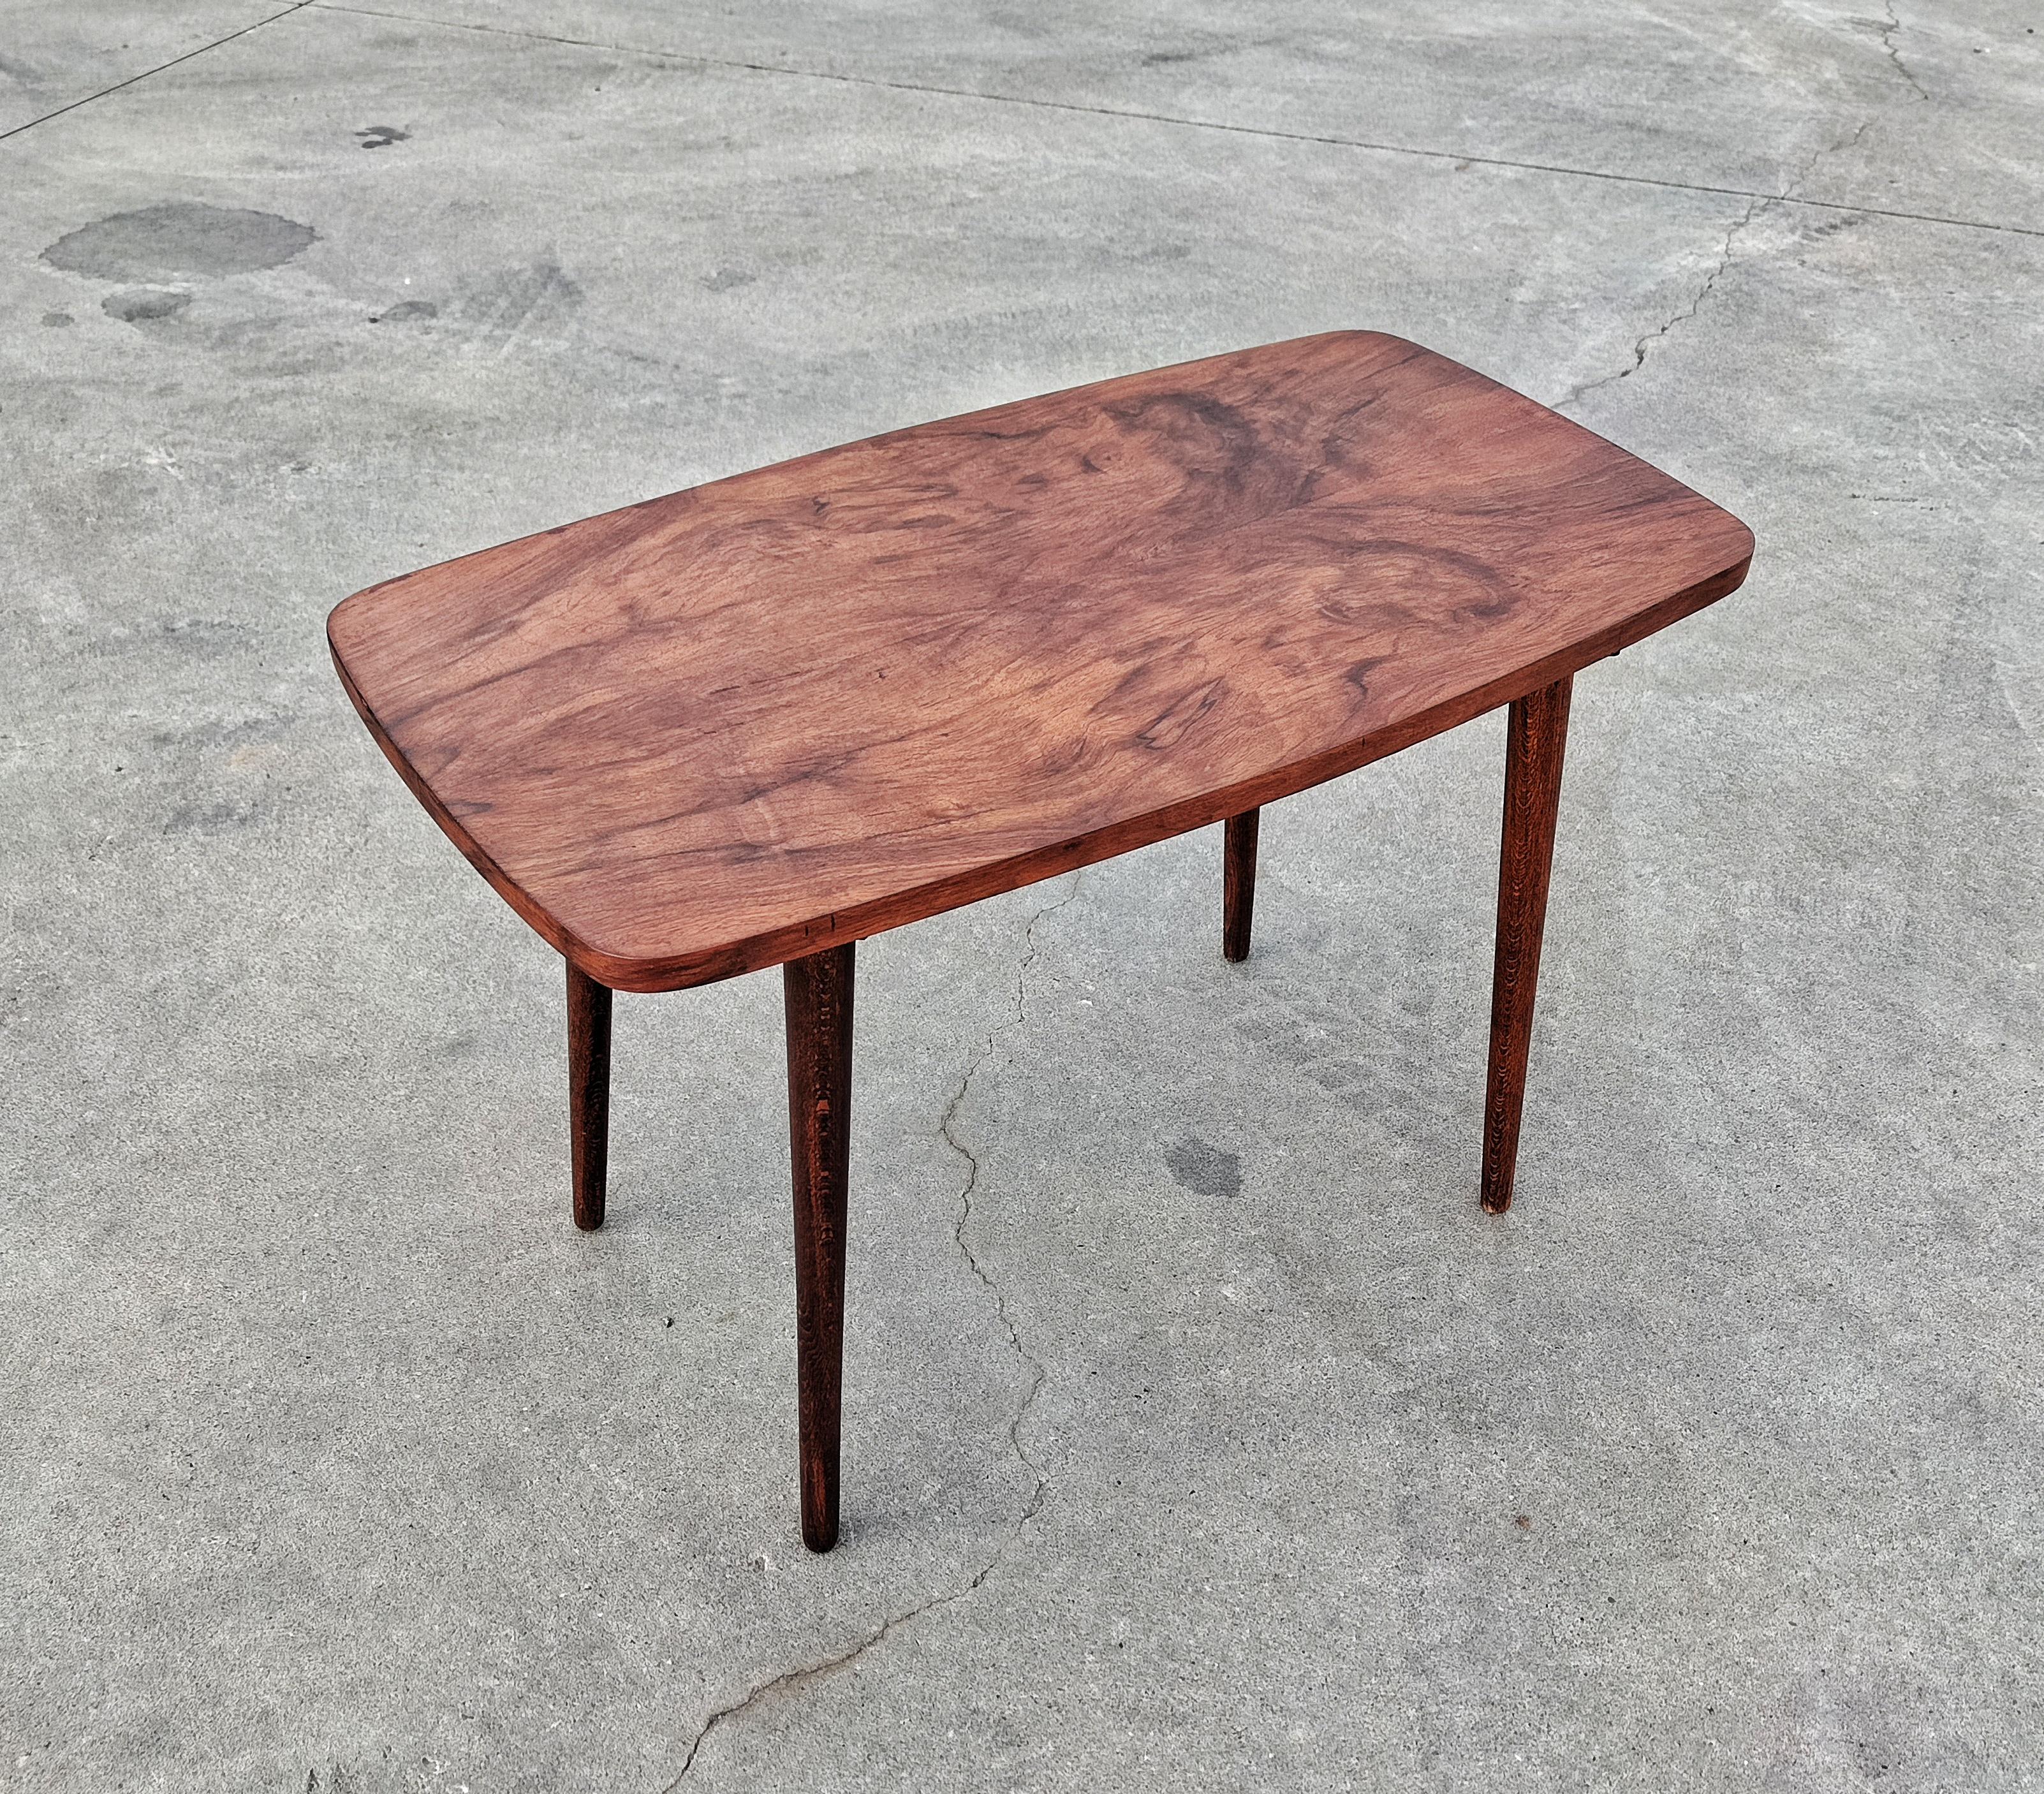 Small Mid-Century Modern Side Table with Walnut Veneer Top, Denmark 1960s For Sale 2